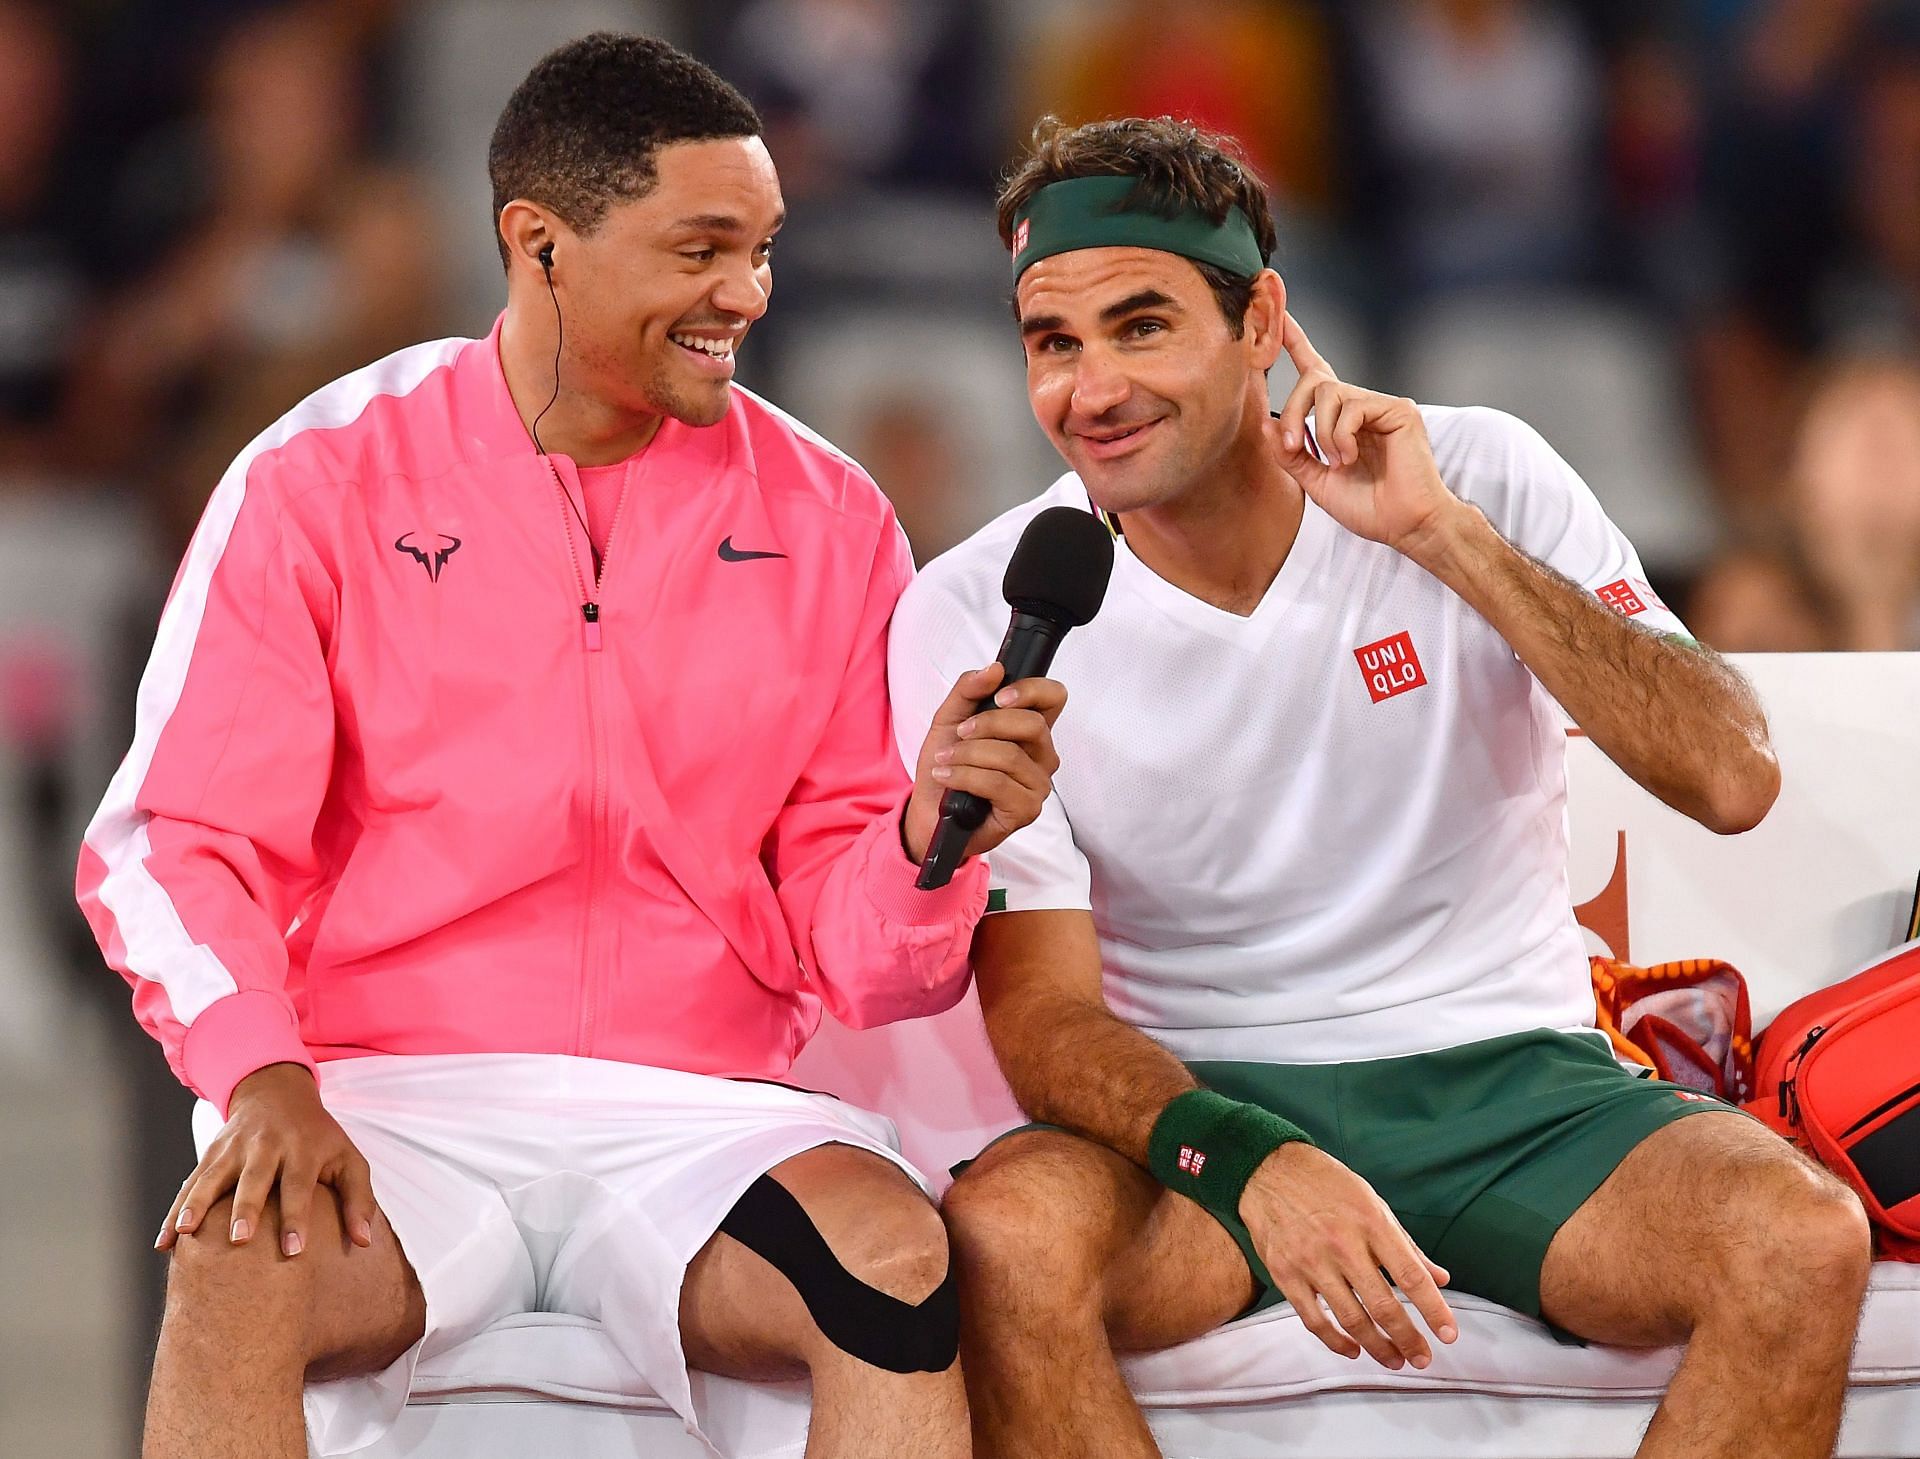 Trevor Noah (L) and Roger Federer during an exhibition match in South Africa